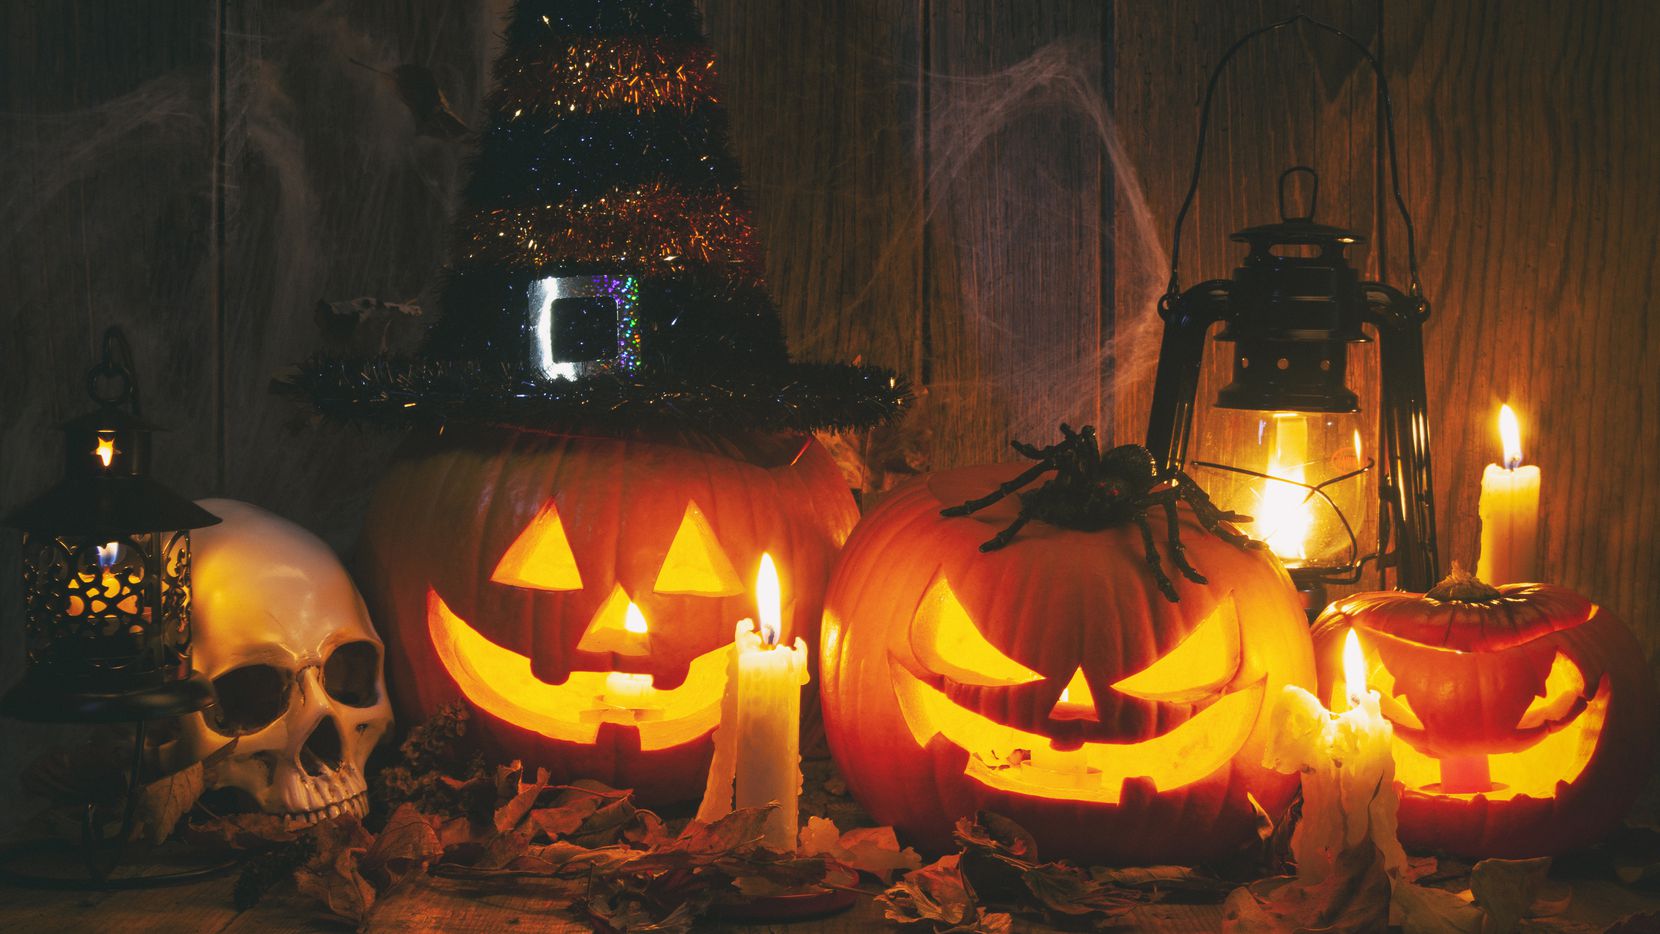 An early Halloween could be the perfect distraction from our